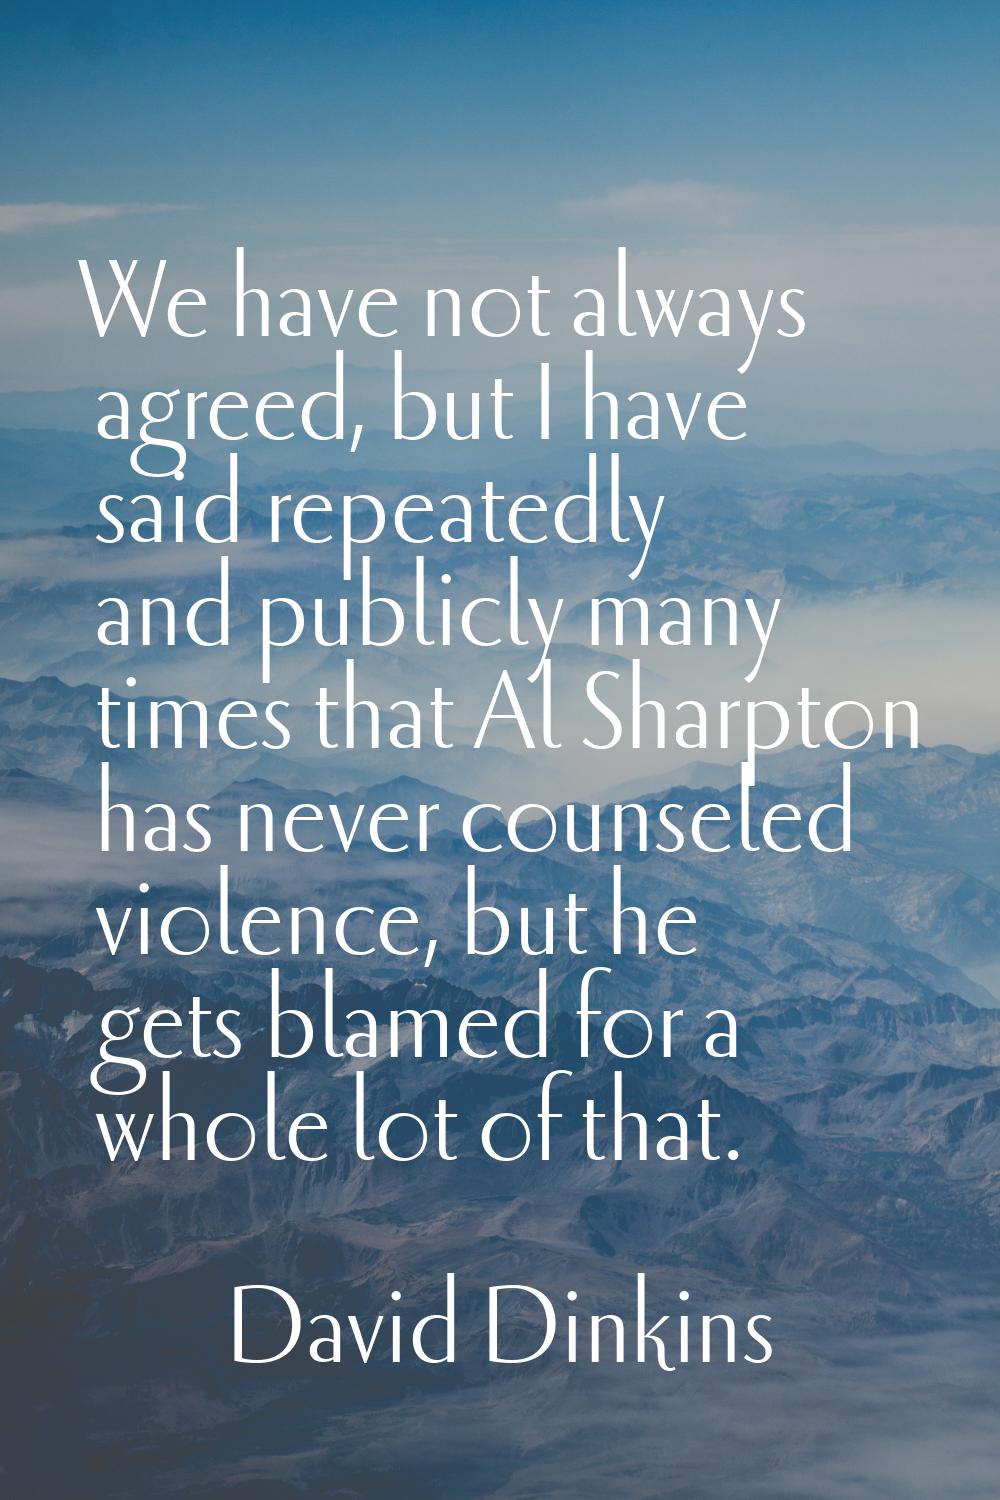 We have not always agreed, but I have said repeatedly and publicly many times that Al Sharpton has 